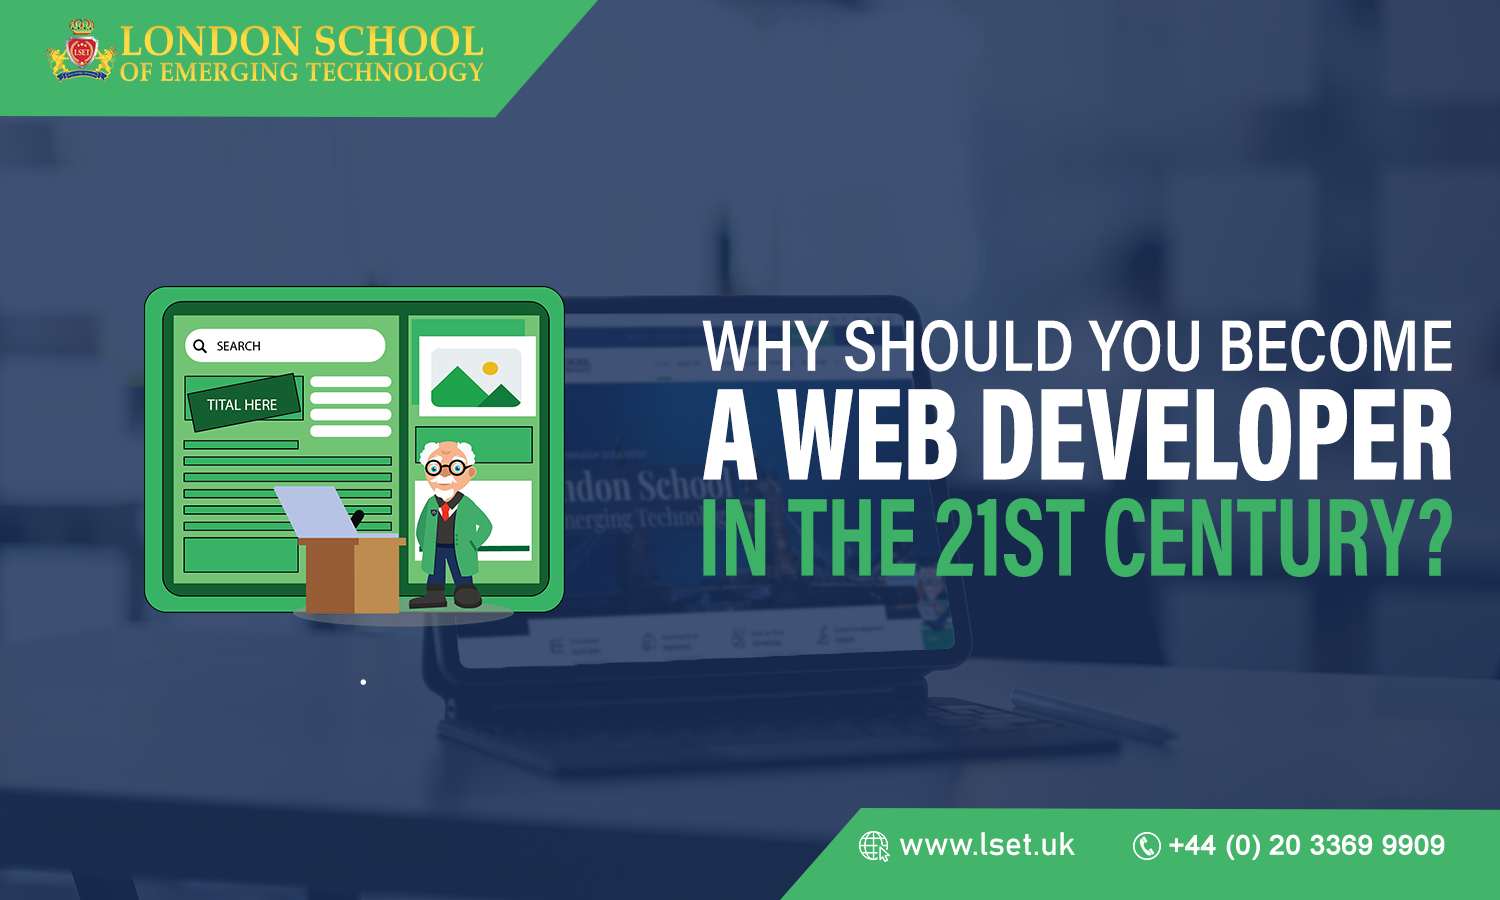 Why should you become a web developer in the 21st century